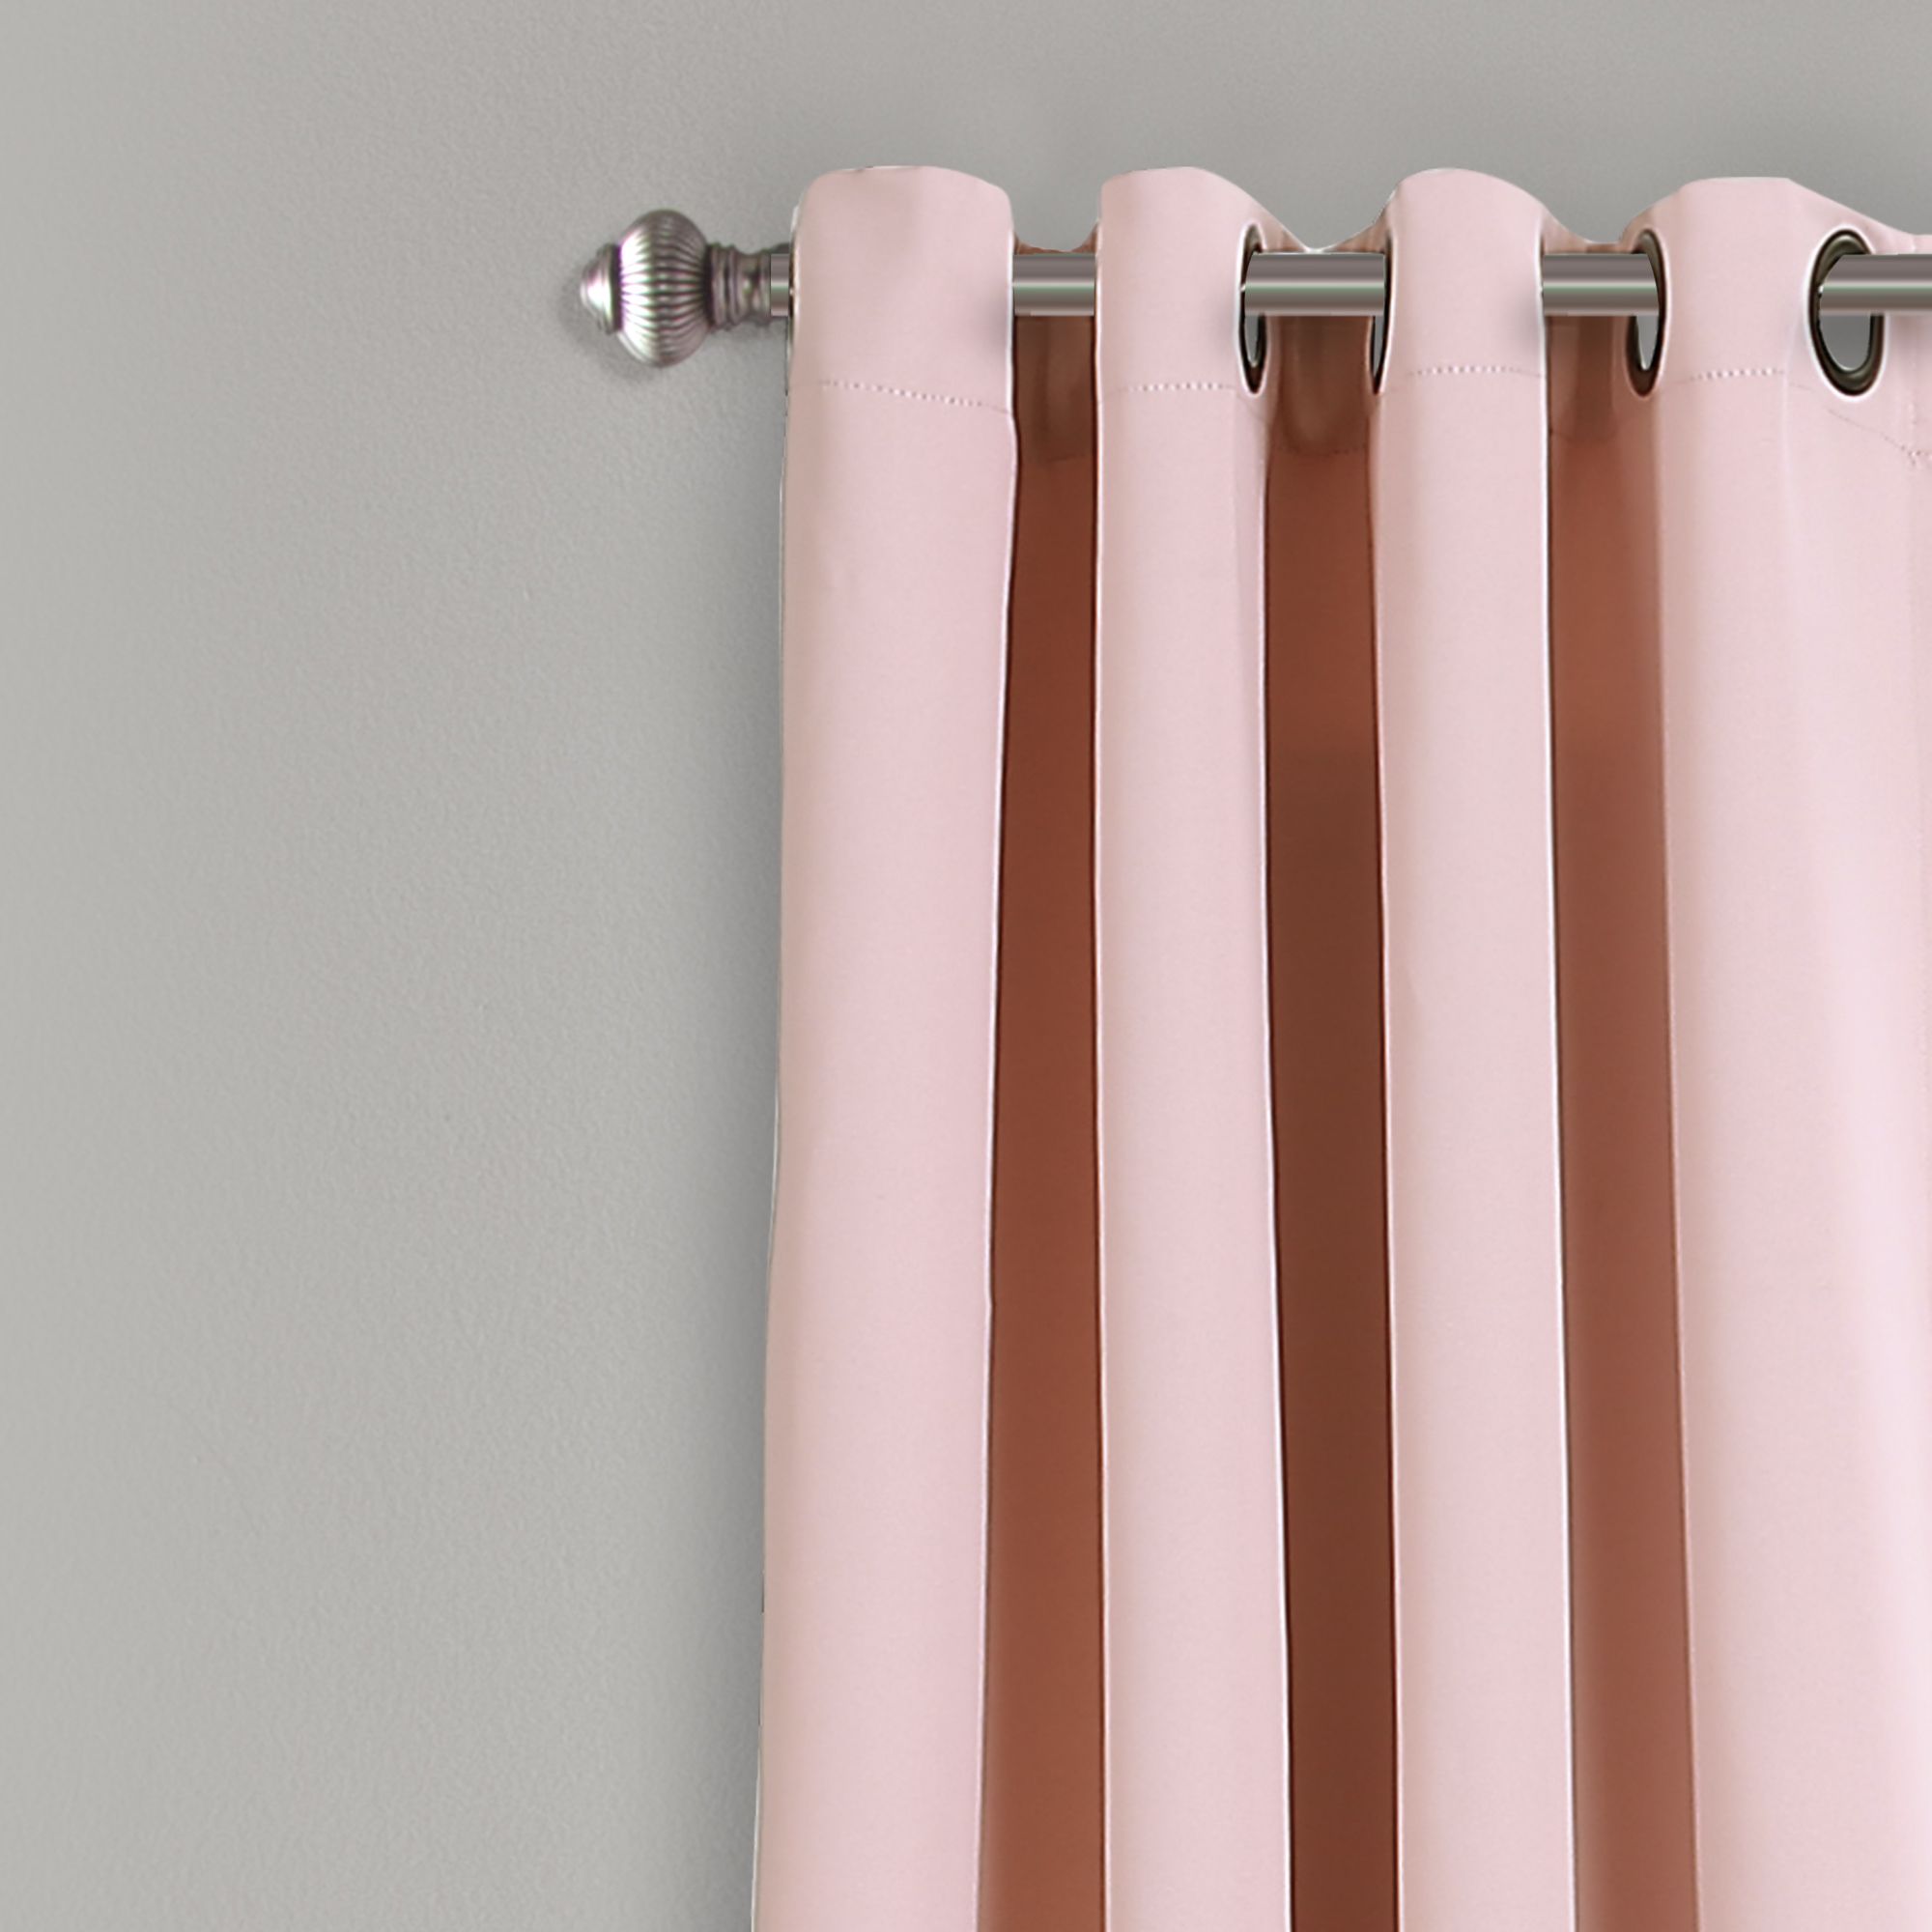 Details About Lush Dcor Insulated Grommet Blackout Curtain Panels Pink Pair  Set 52x63 Inside Insulated Grommet Blackout Curtain Panel Pairs (View 6 of 20)